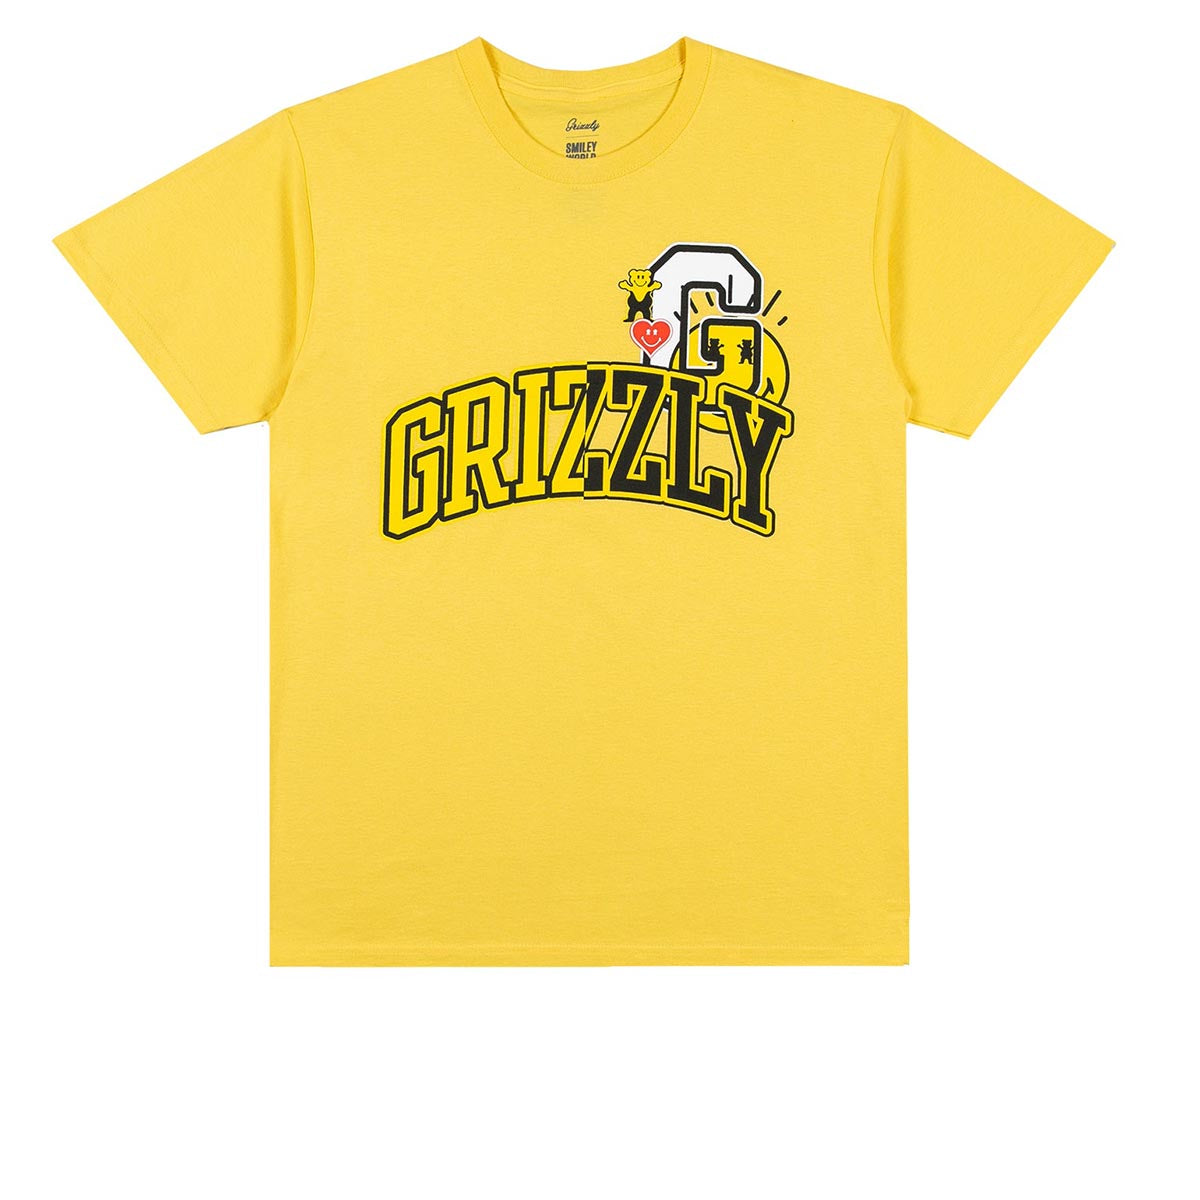 Grizzly x Smiley World School Of Happiness T-Shirt - Yellow image 1